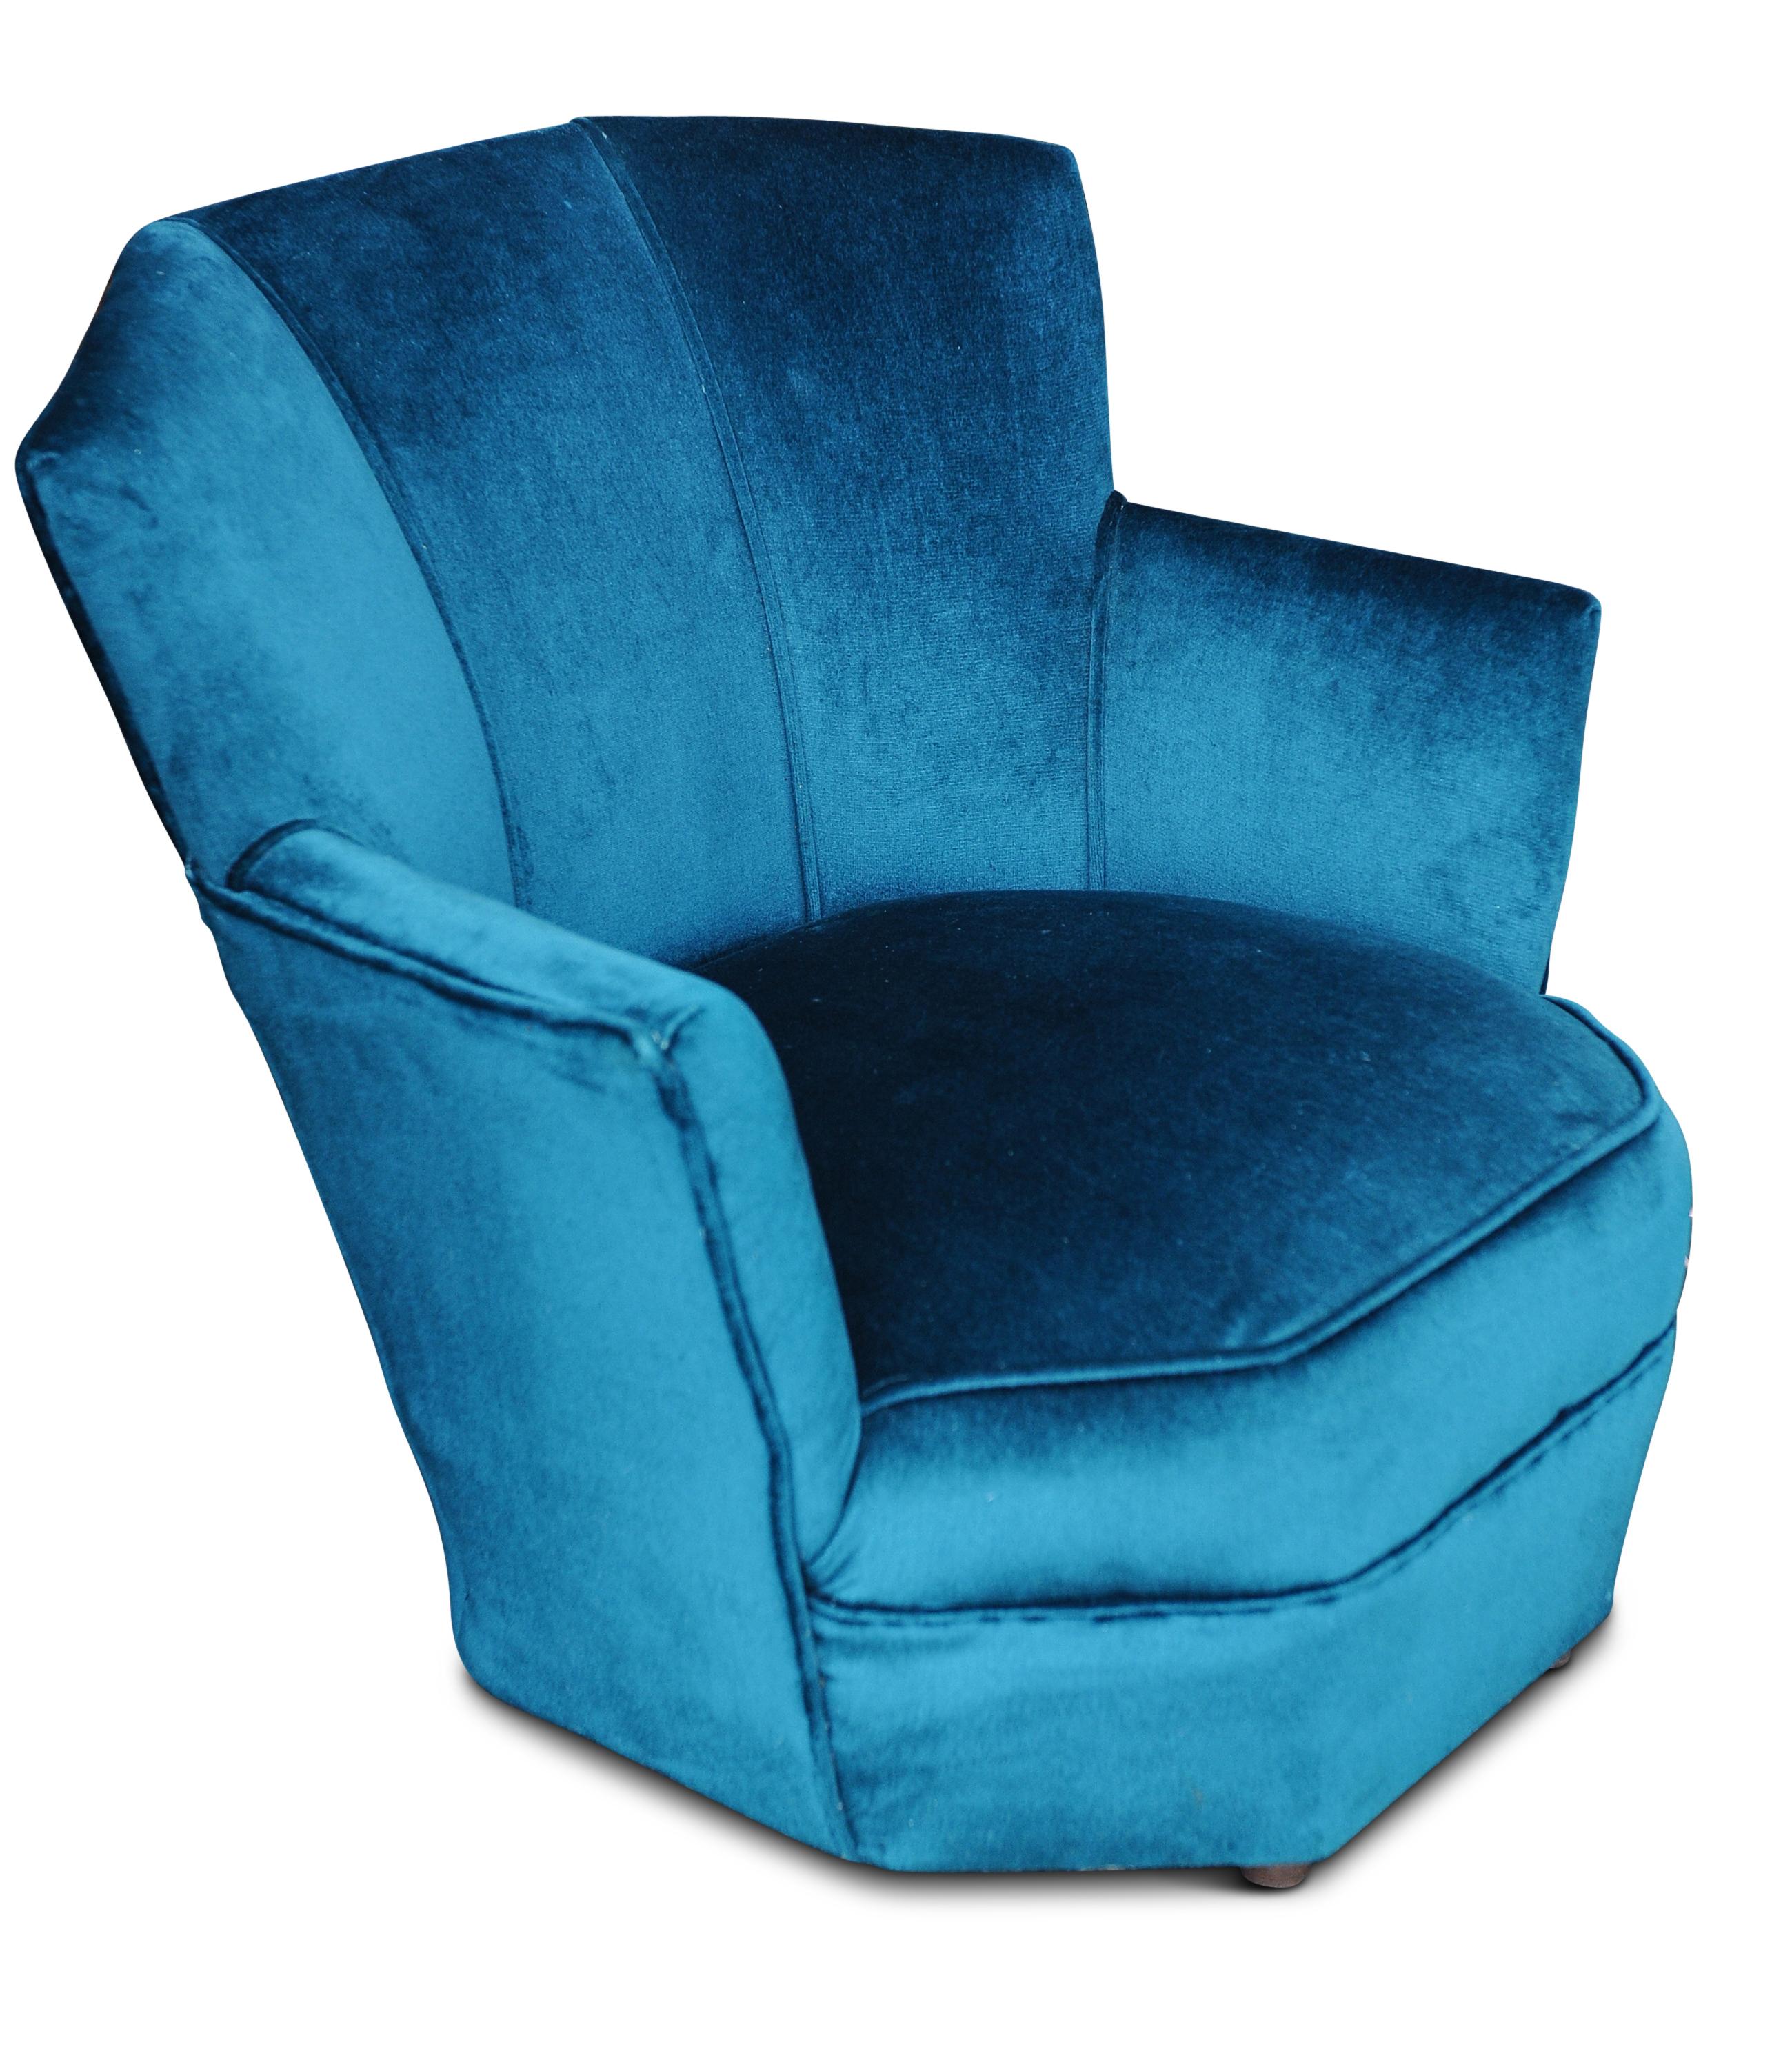 An Original Art Deco rich turquoise blue velvet fan back cocktail chair with metal feet 1930s

No branding or labels. 

Additional dimensions 

Height to arms 49.5cm
Height to seat 33.5cm
Seat depth 56cm
Seat width 54cm.